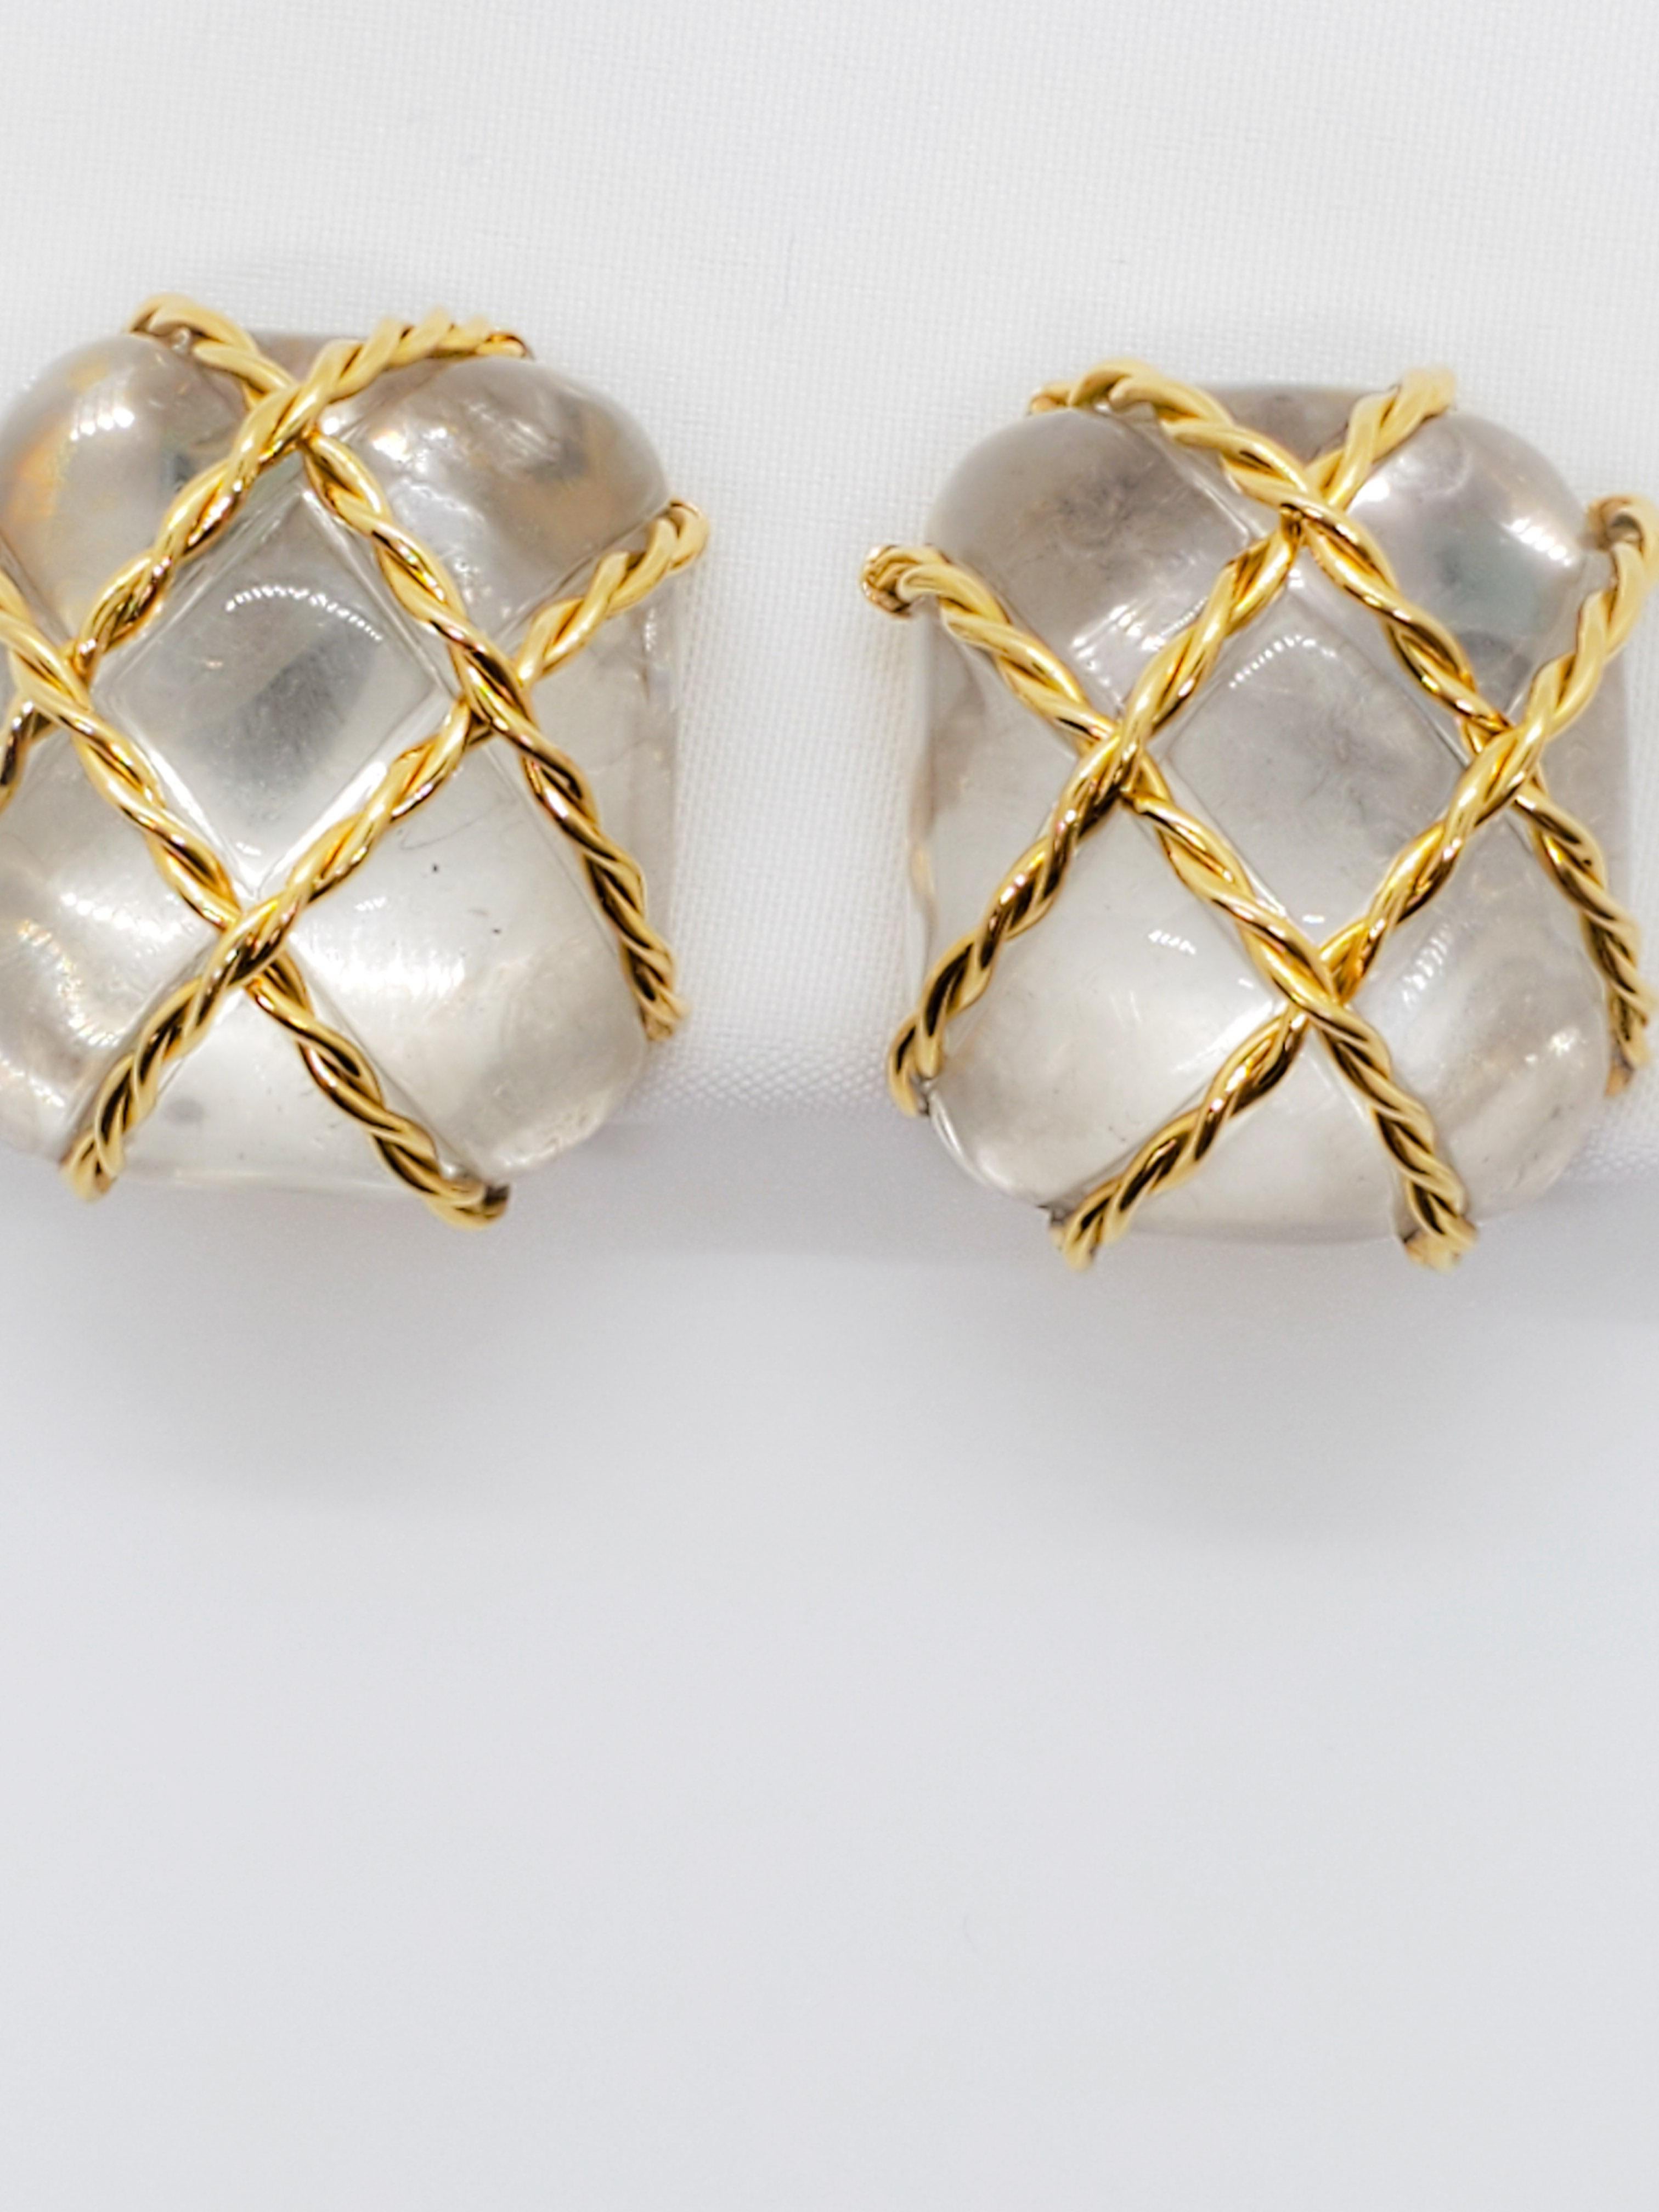 Gorgeous authentic rock crystal earrings by Seaman Schepps with a classic criss cross gold design.  Clip on.  18k Yellow Gold.